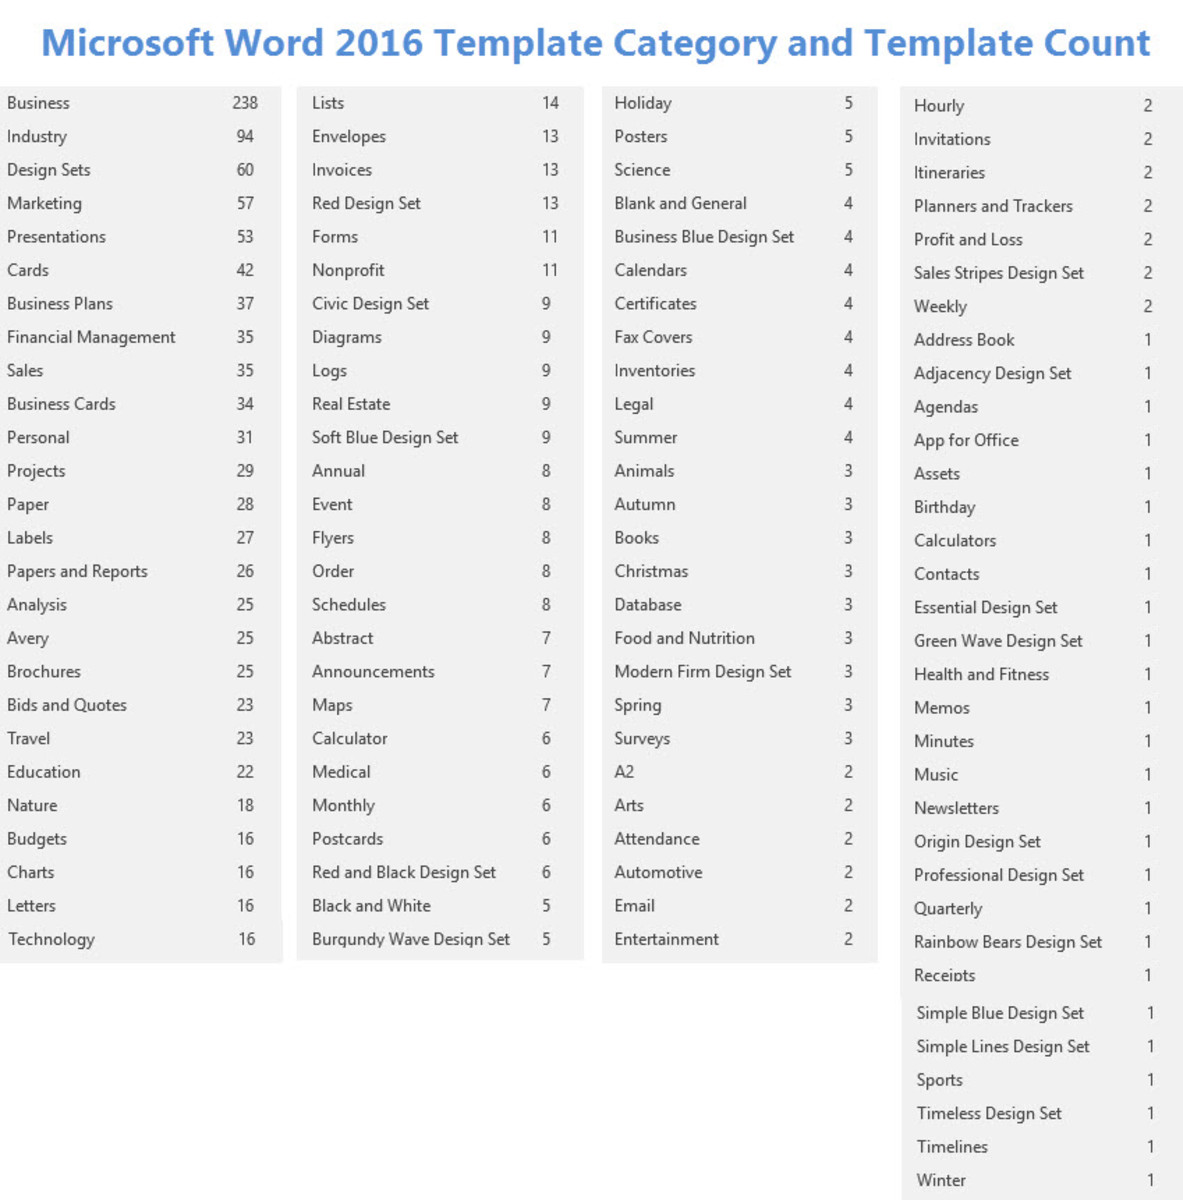 Microsoft Word 2016 Template Categories and Template Count